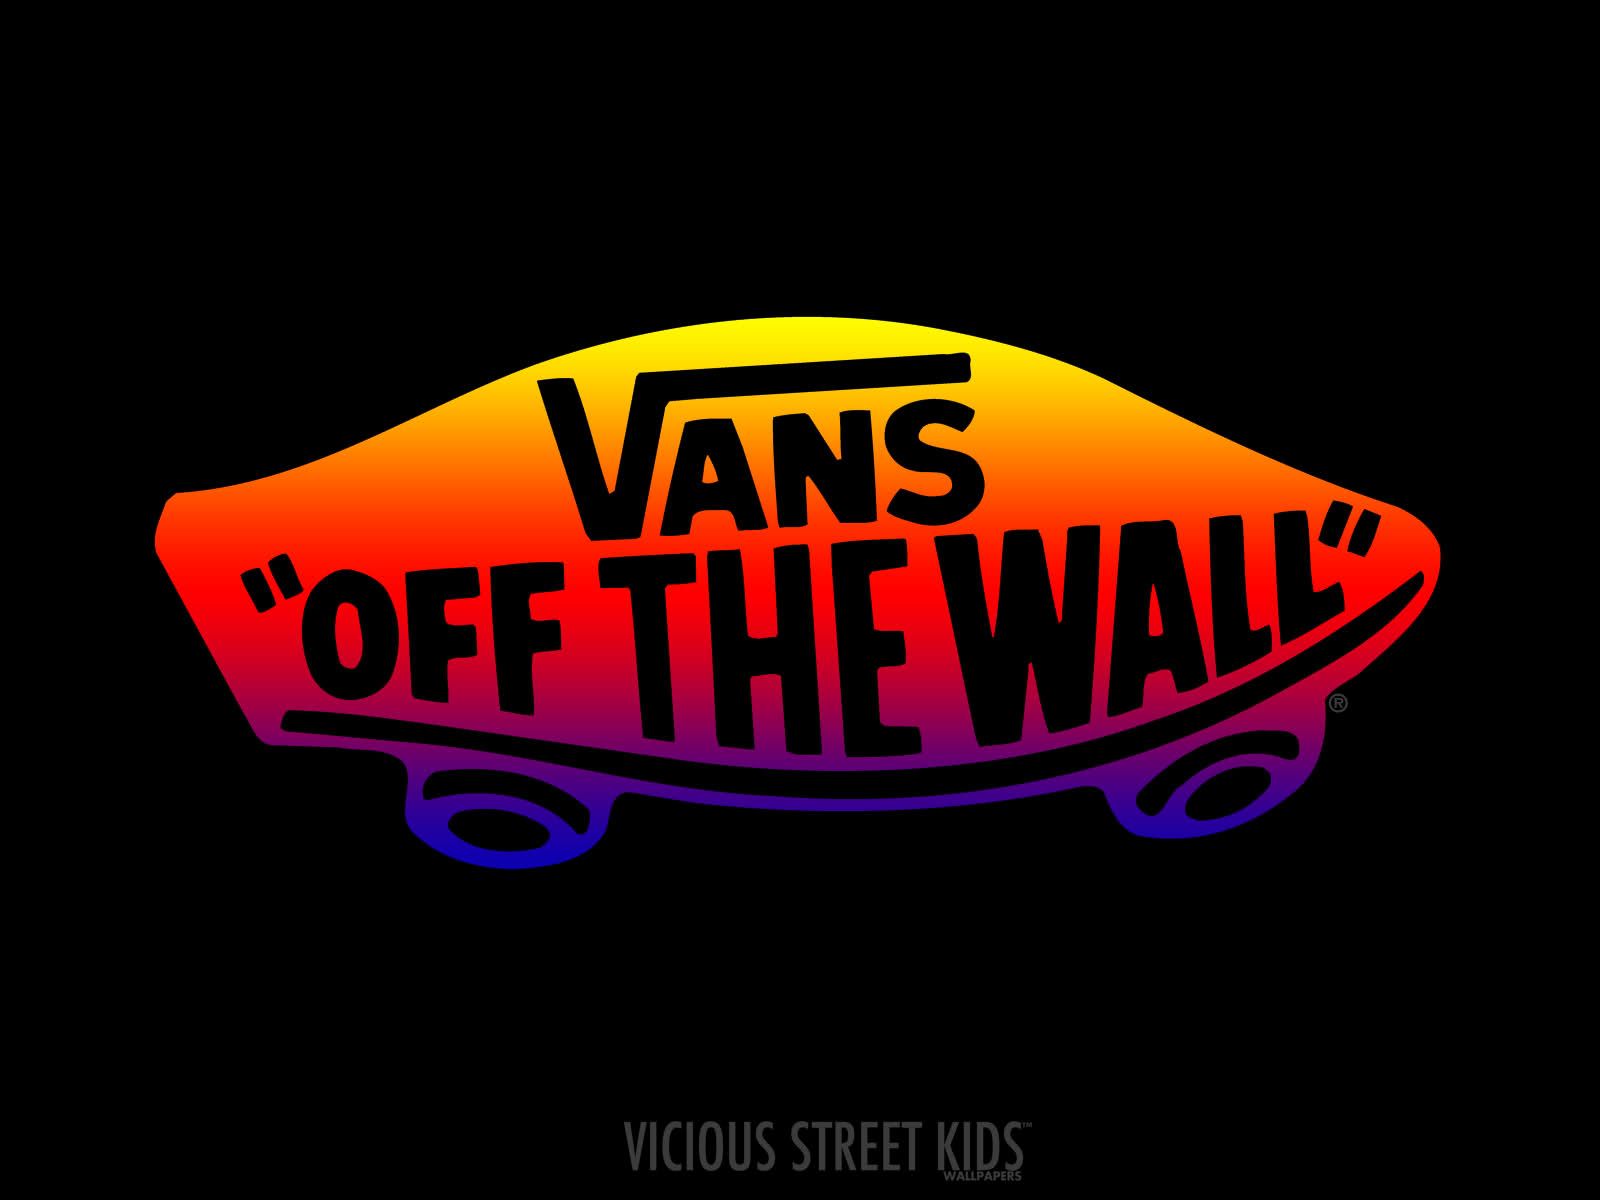 vans this is off the wall